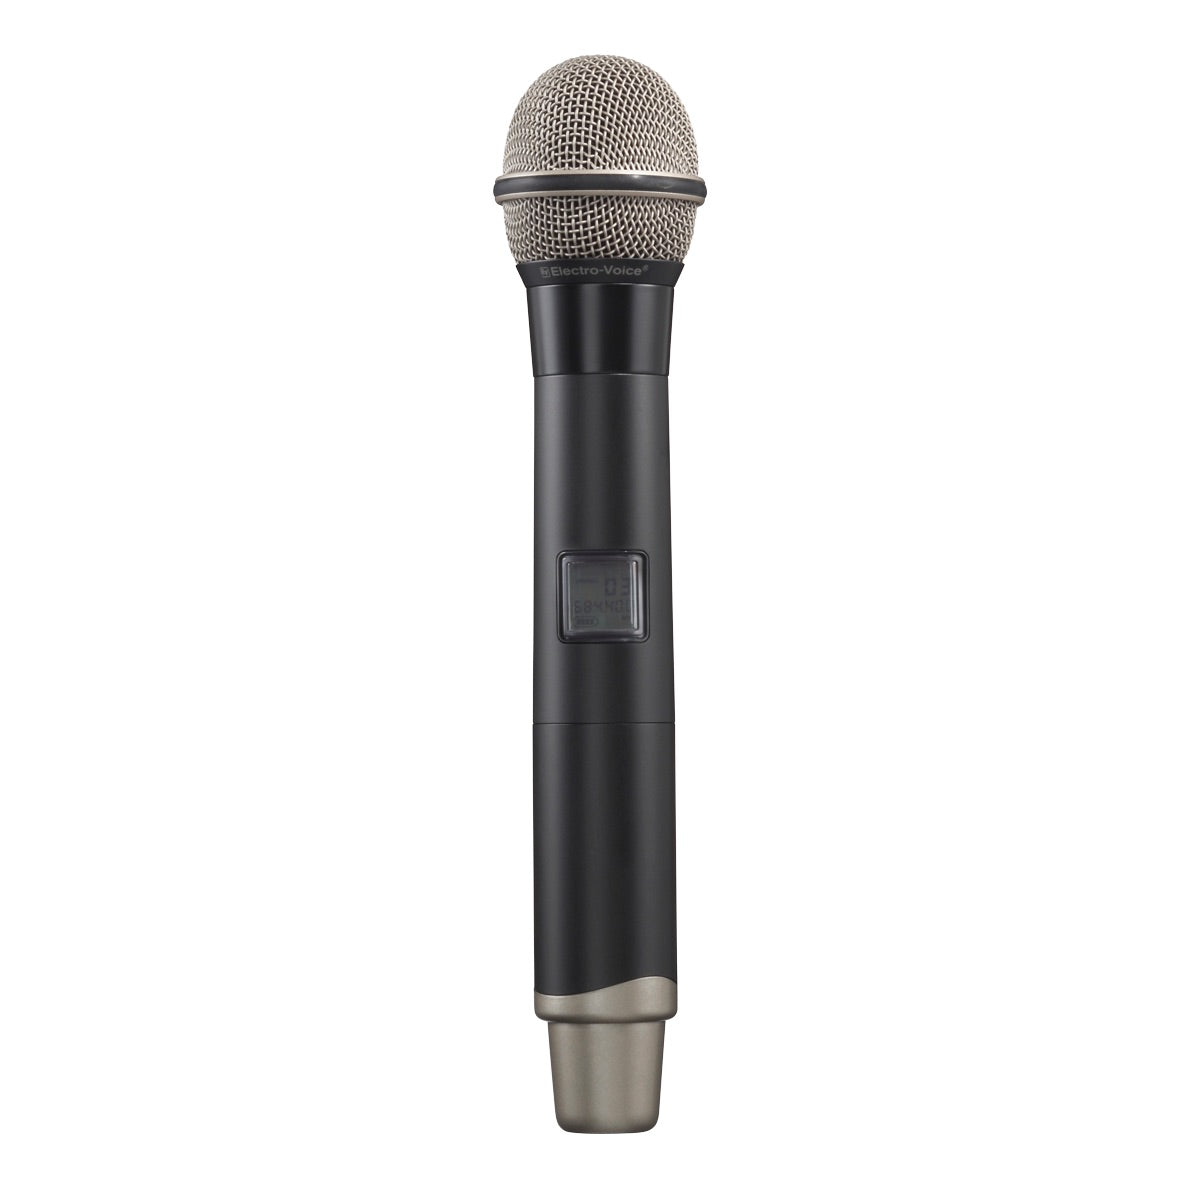 Electro-Voice R300-HD Handheld System with PL22 Dynamic Microphone, transmitter